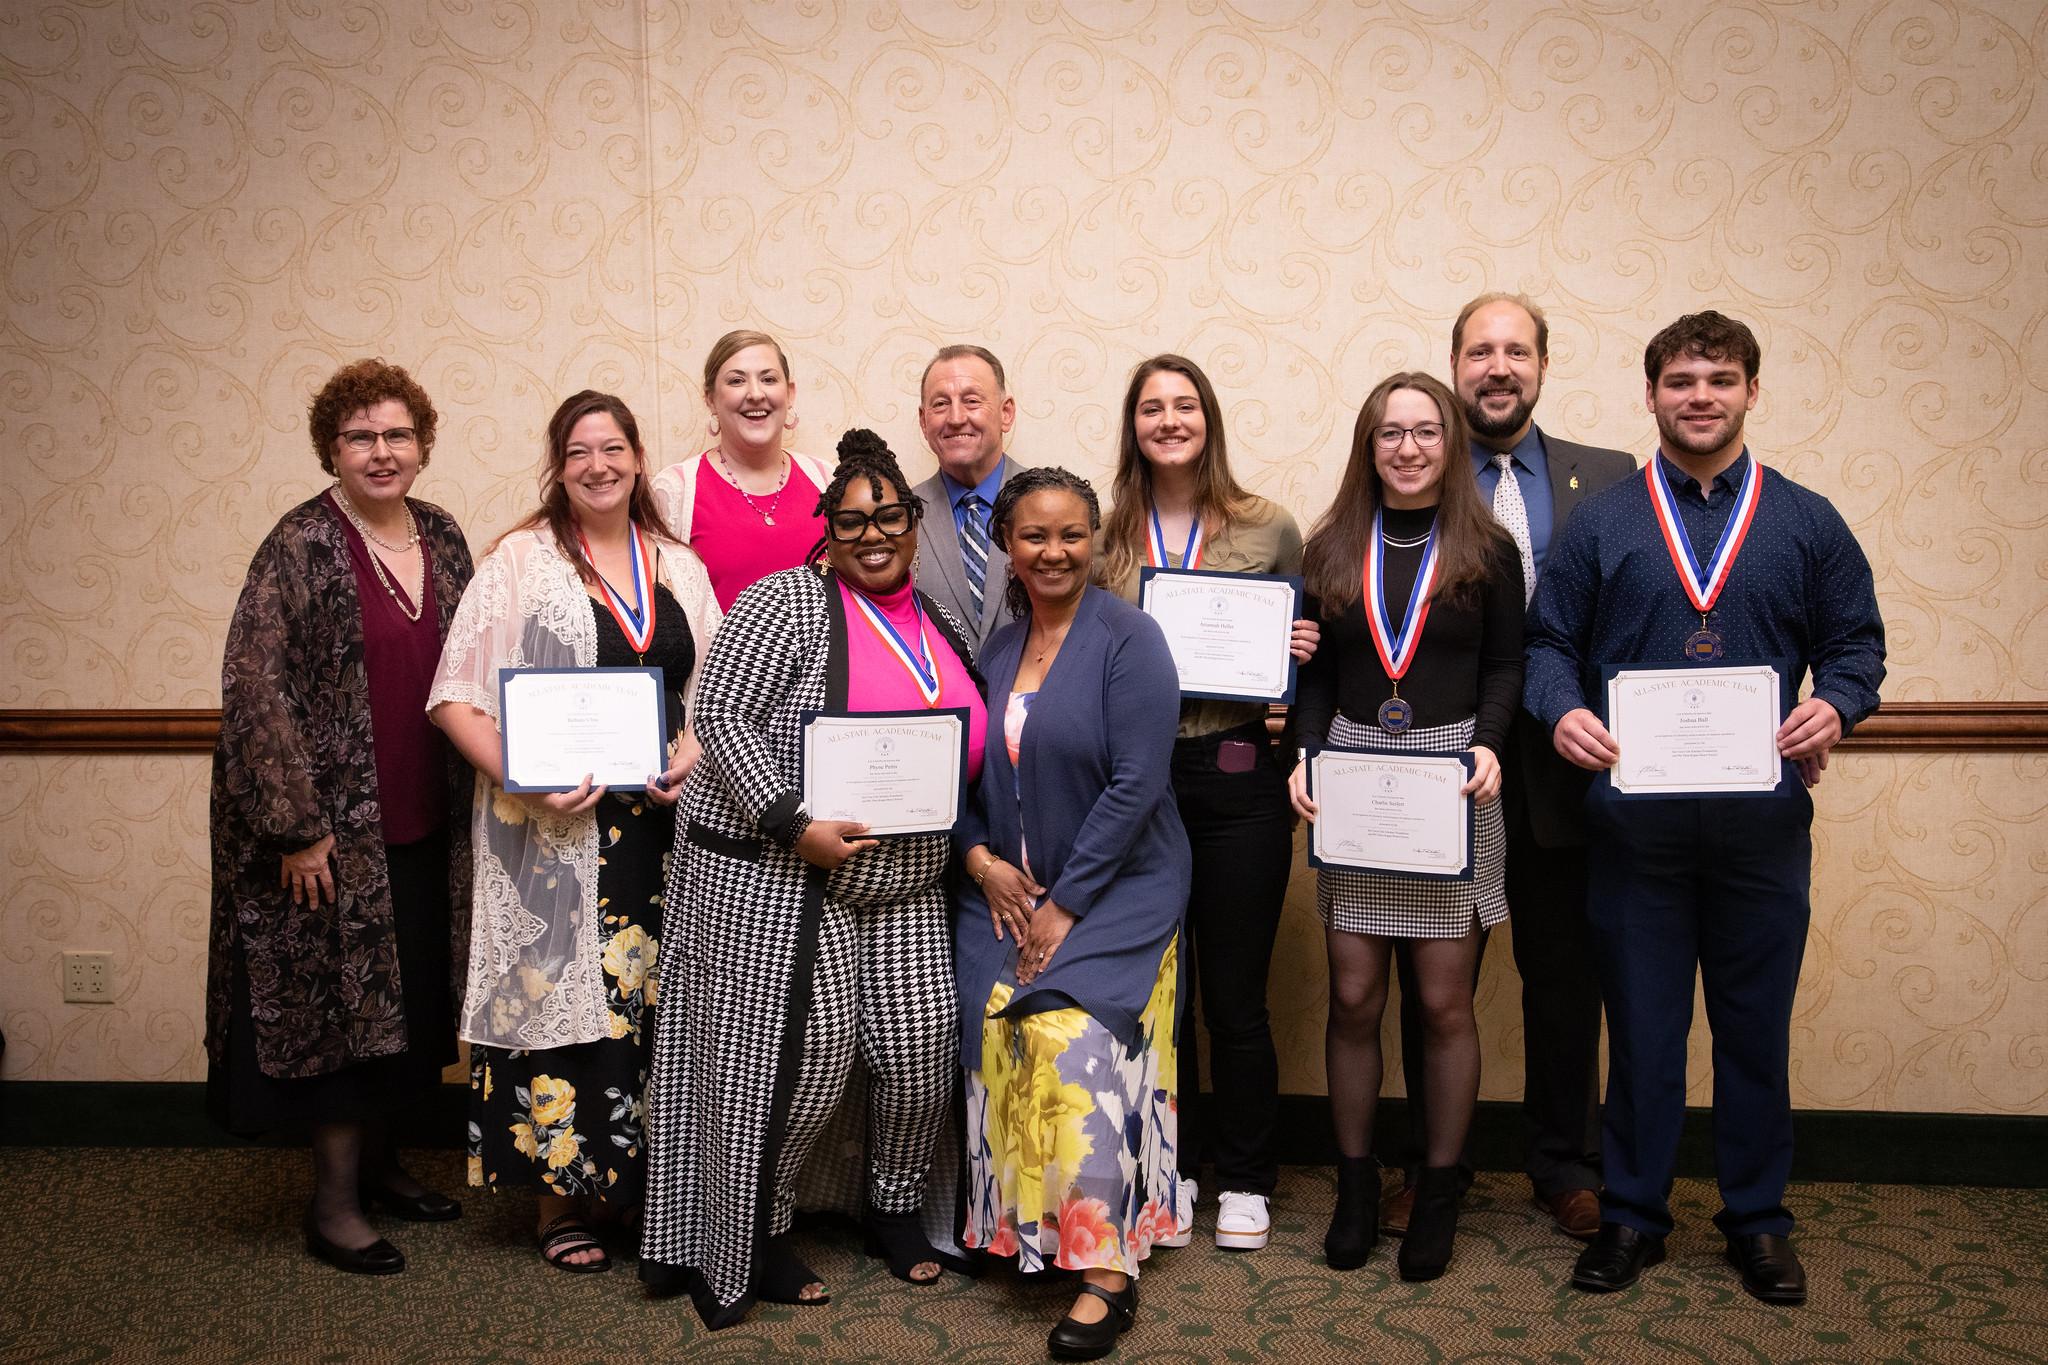 Group photo of PTK All-Academic team members and ceremony attendees